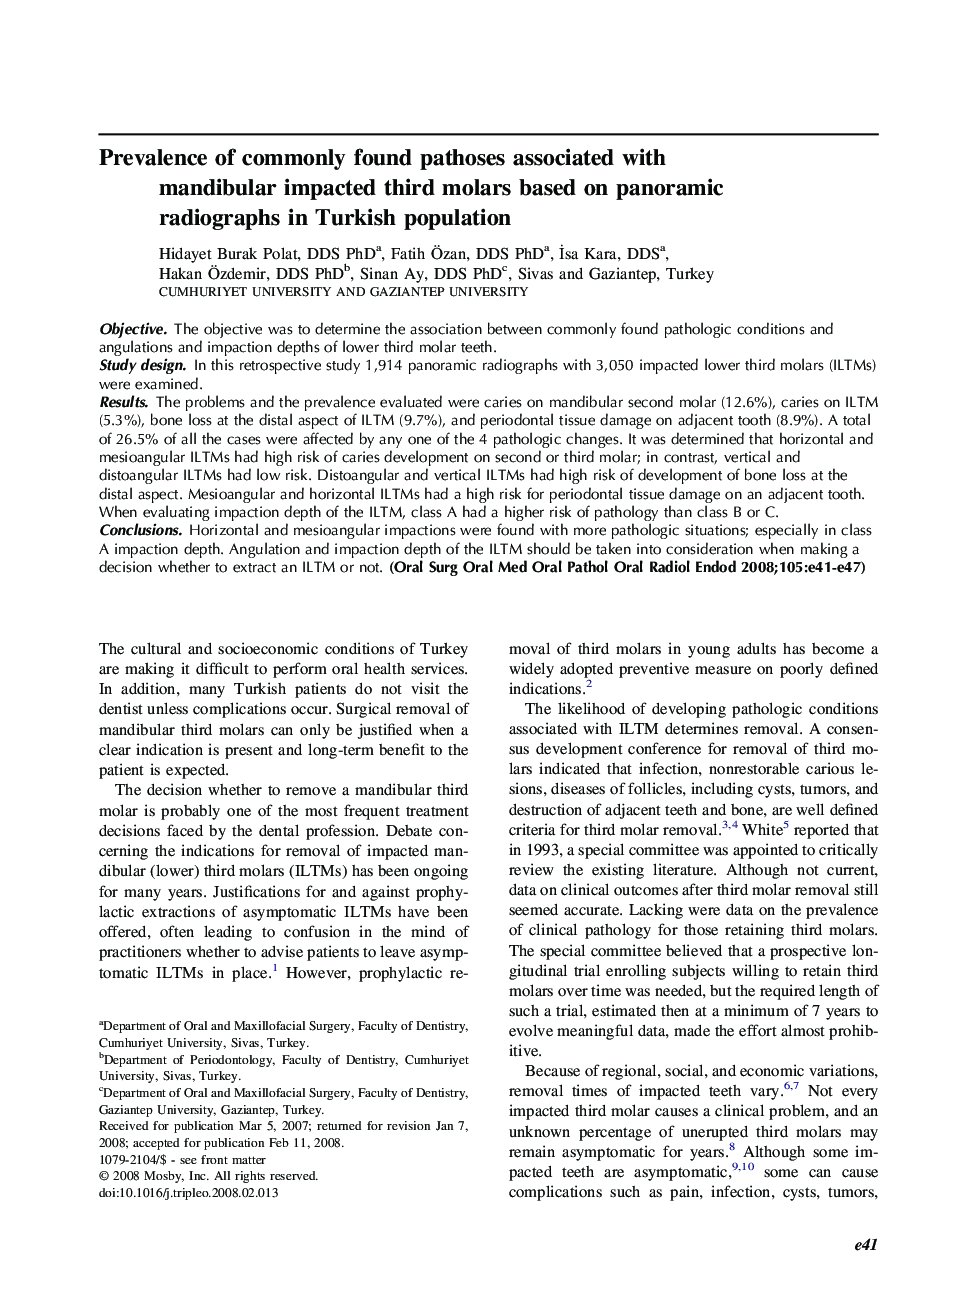 Prevalence of commonly found pathoses associated with mandibular impacted third molars based on panoramic radiographs in Turkish population